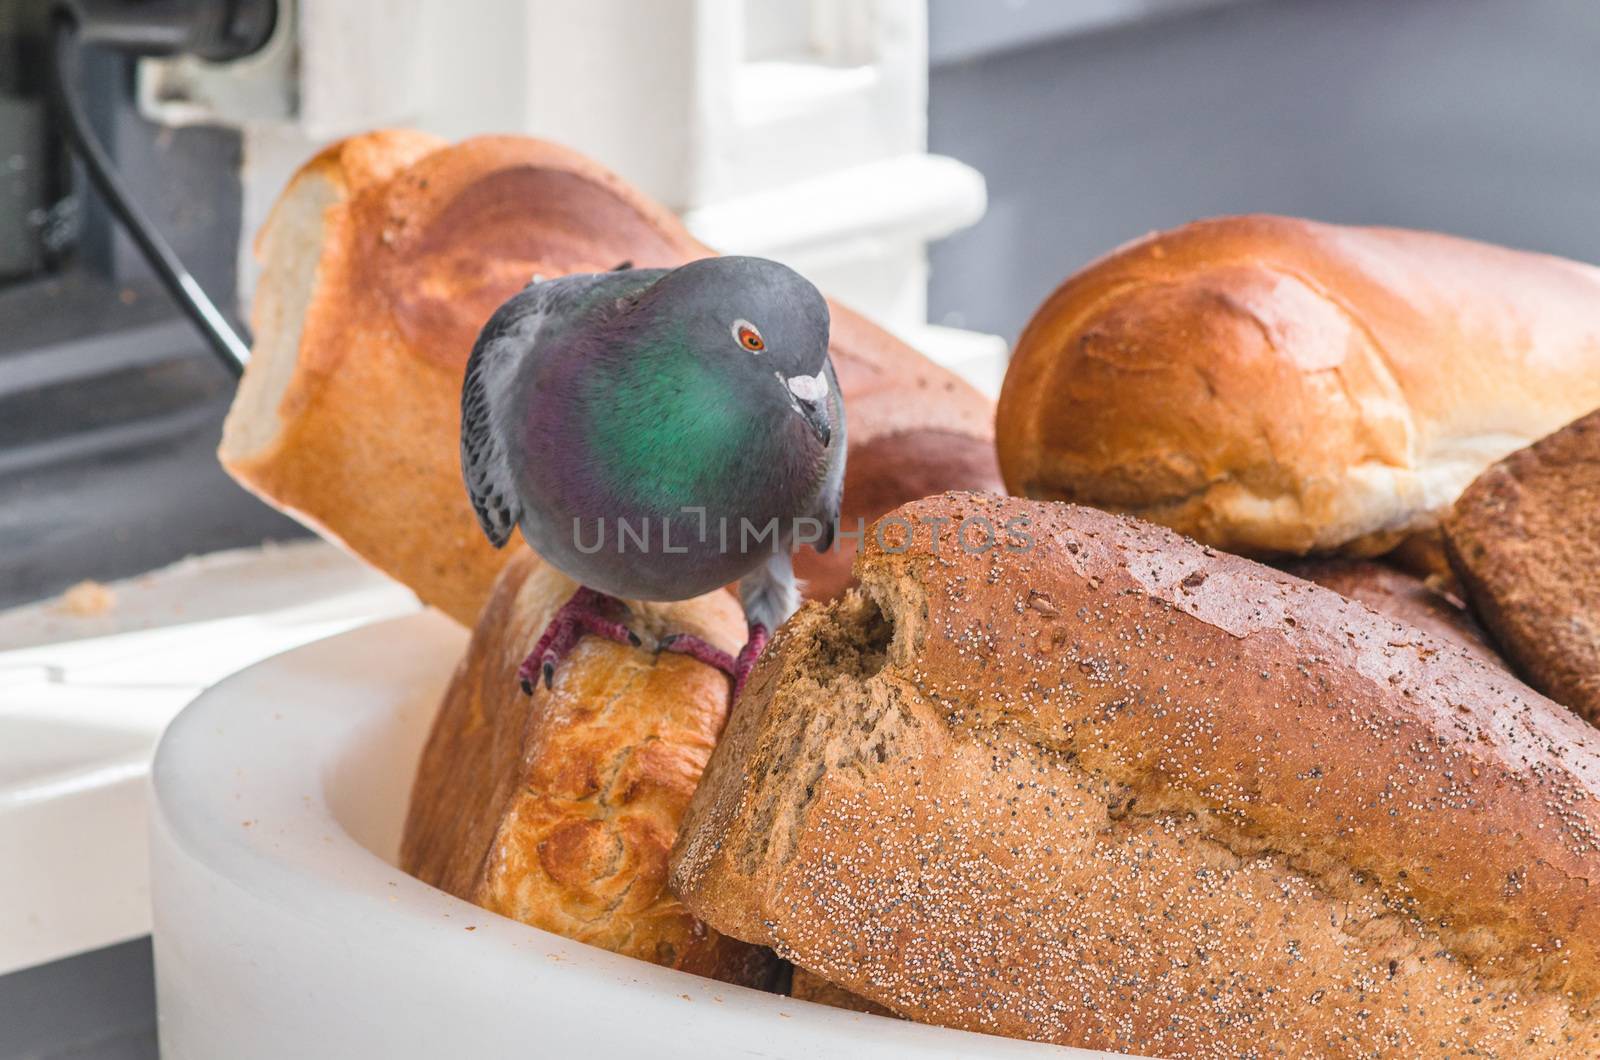  Pigeon eating  the bread by JFsPic